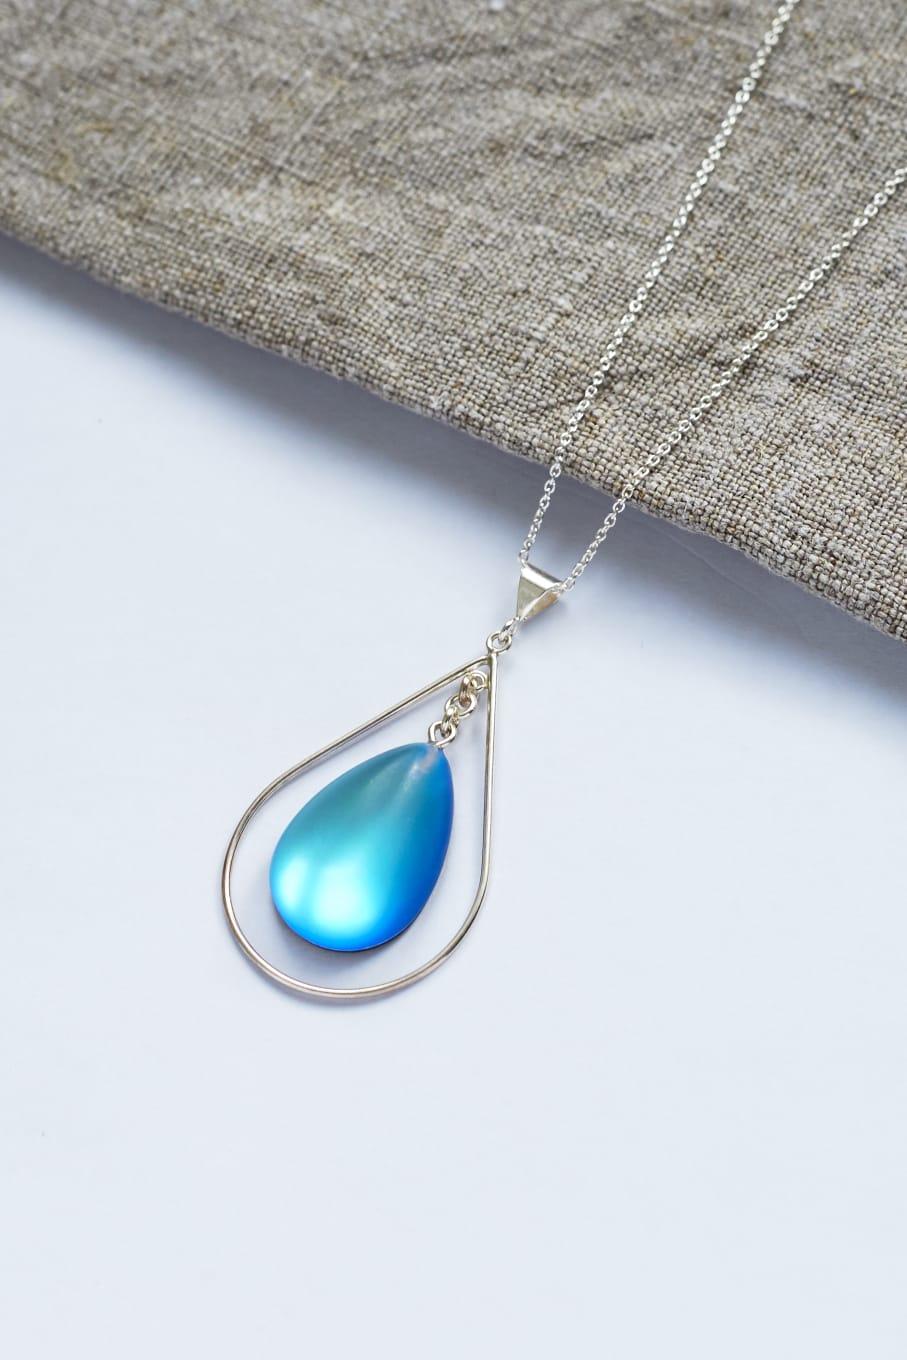 Crystal Oval with Sterling Silver Loop Pendant by LeightWorks